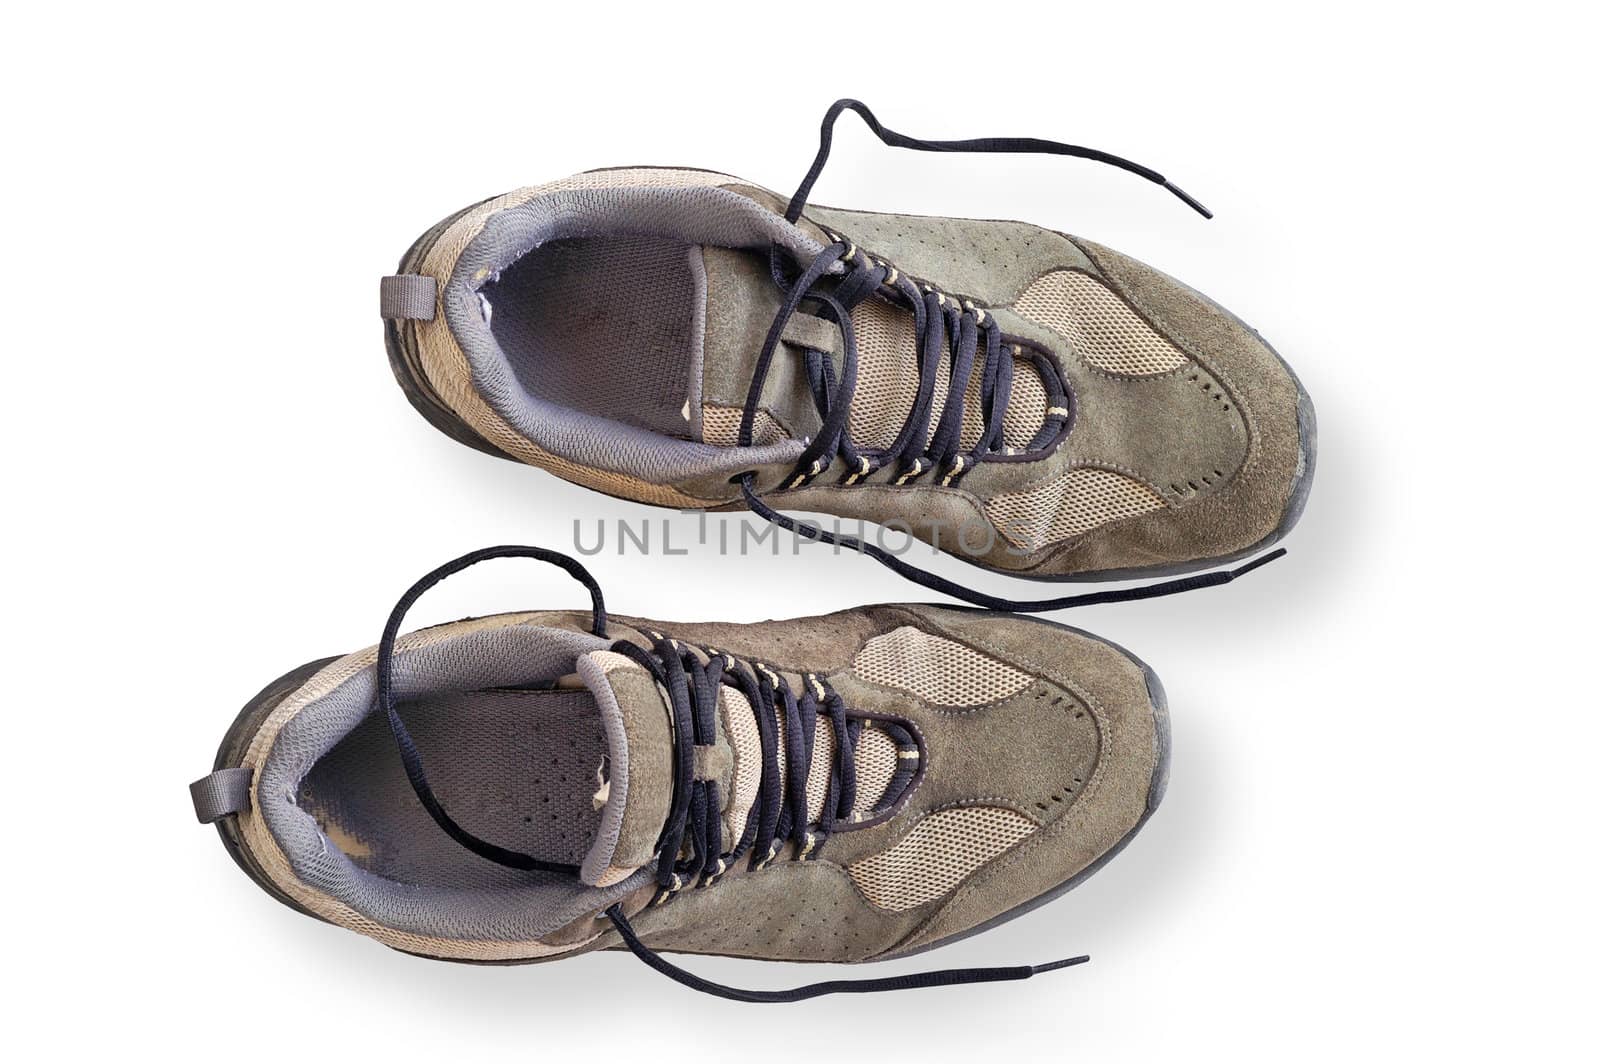 Worn walking shoes with clipping path